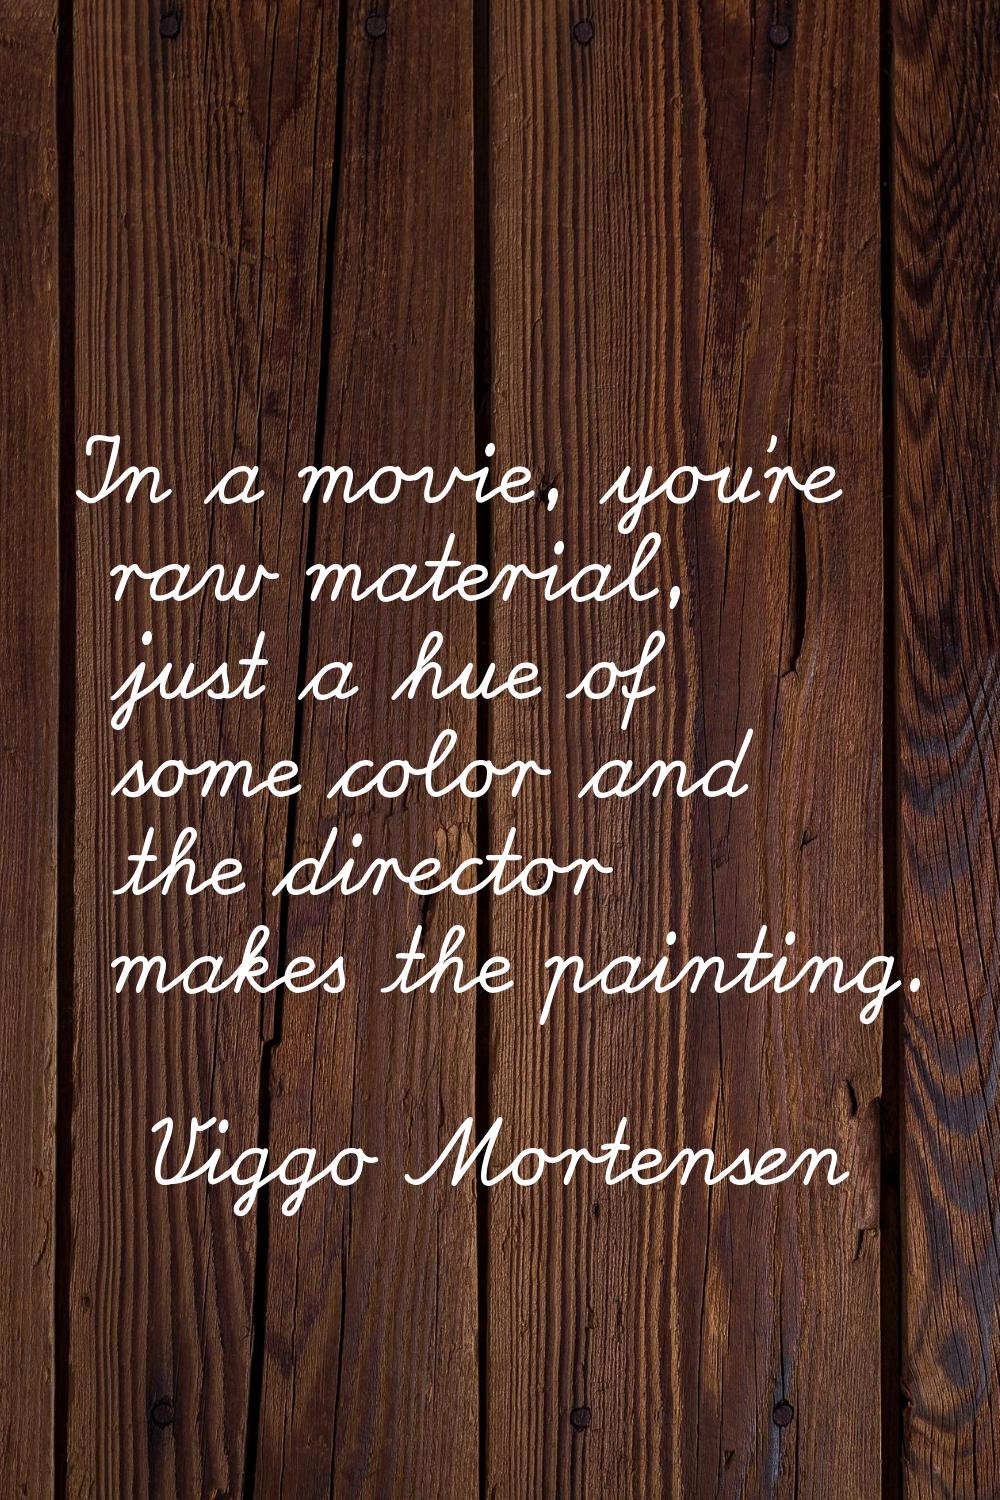 In a movie, you're raw material, just a hue of some color and the director makes the painting.